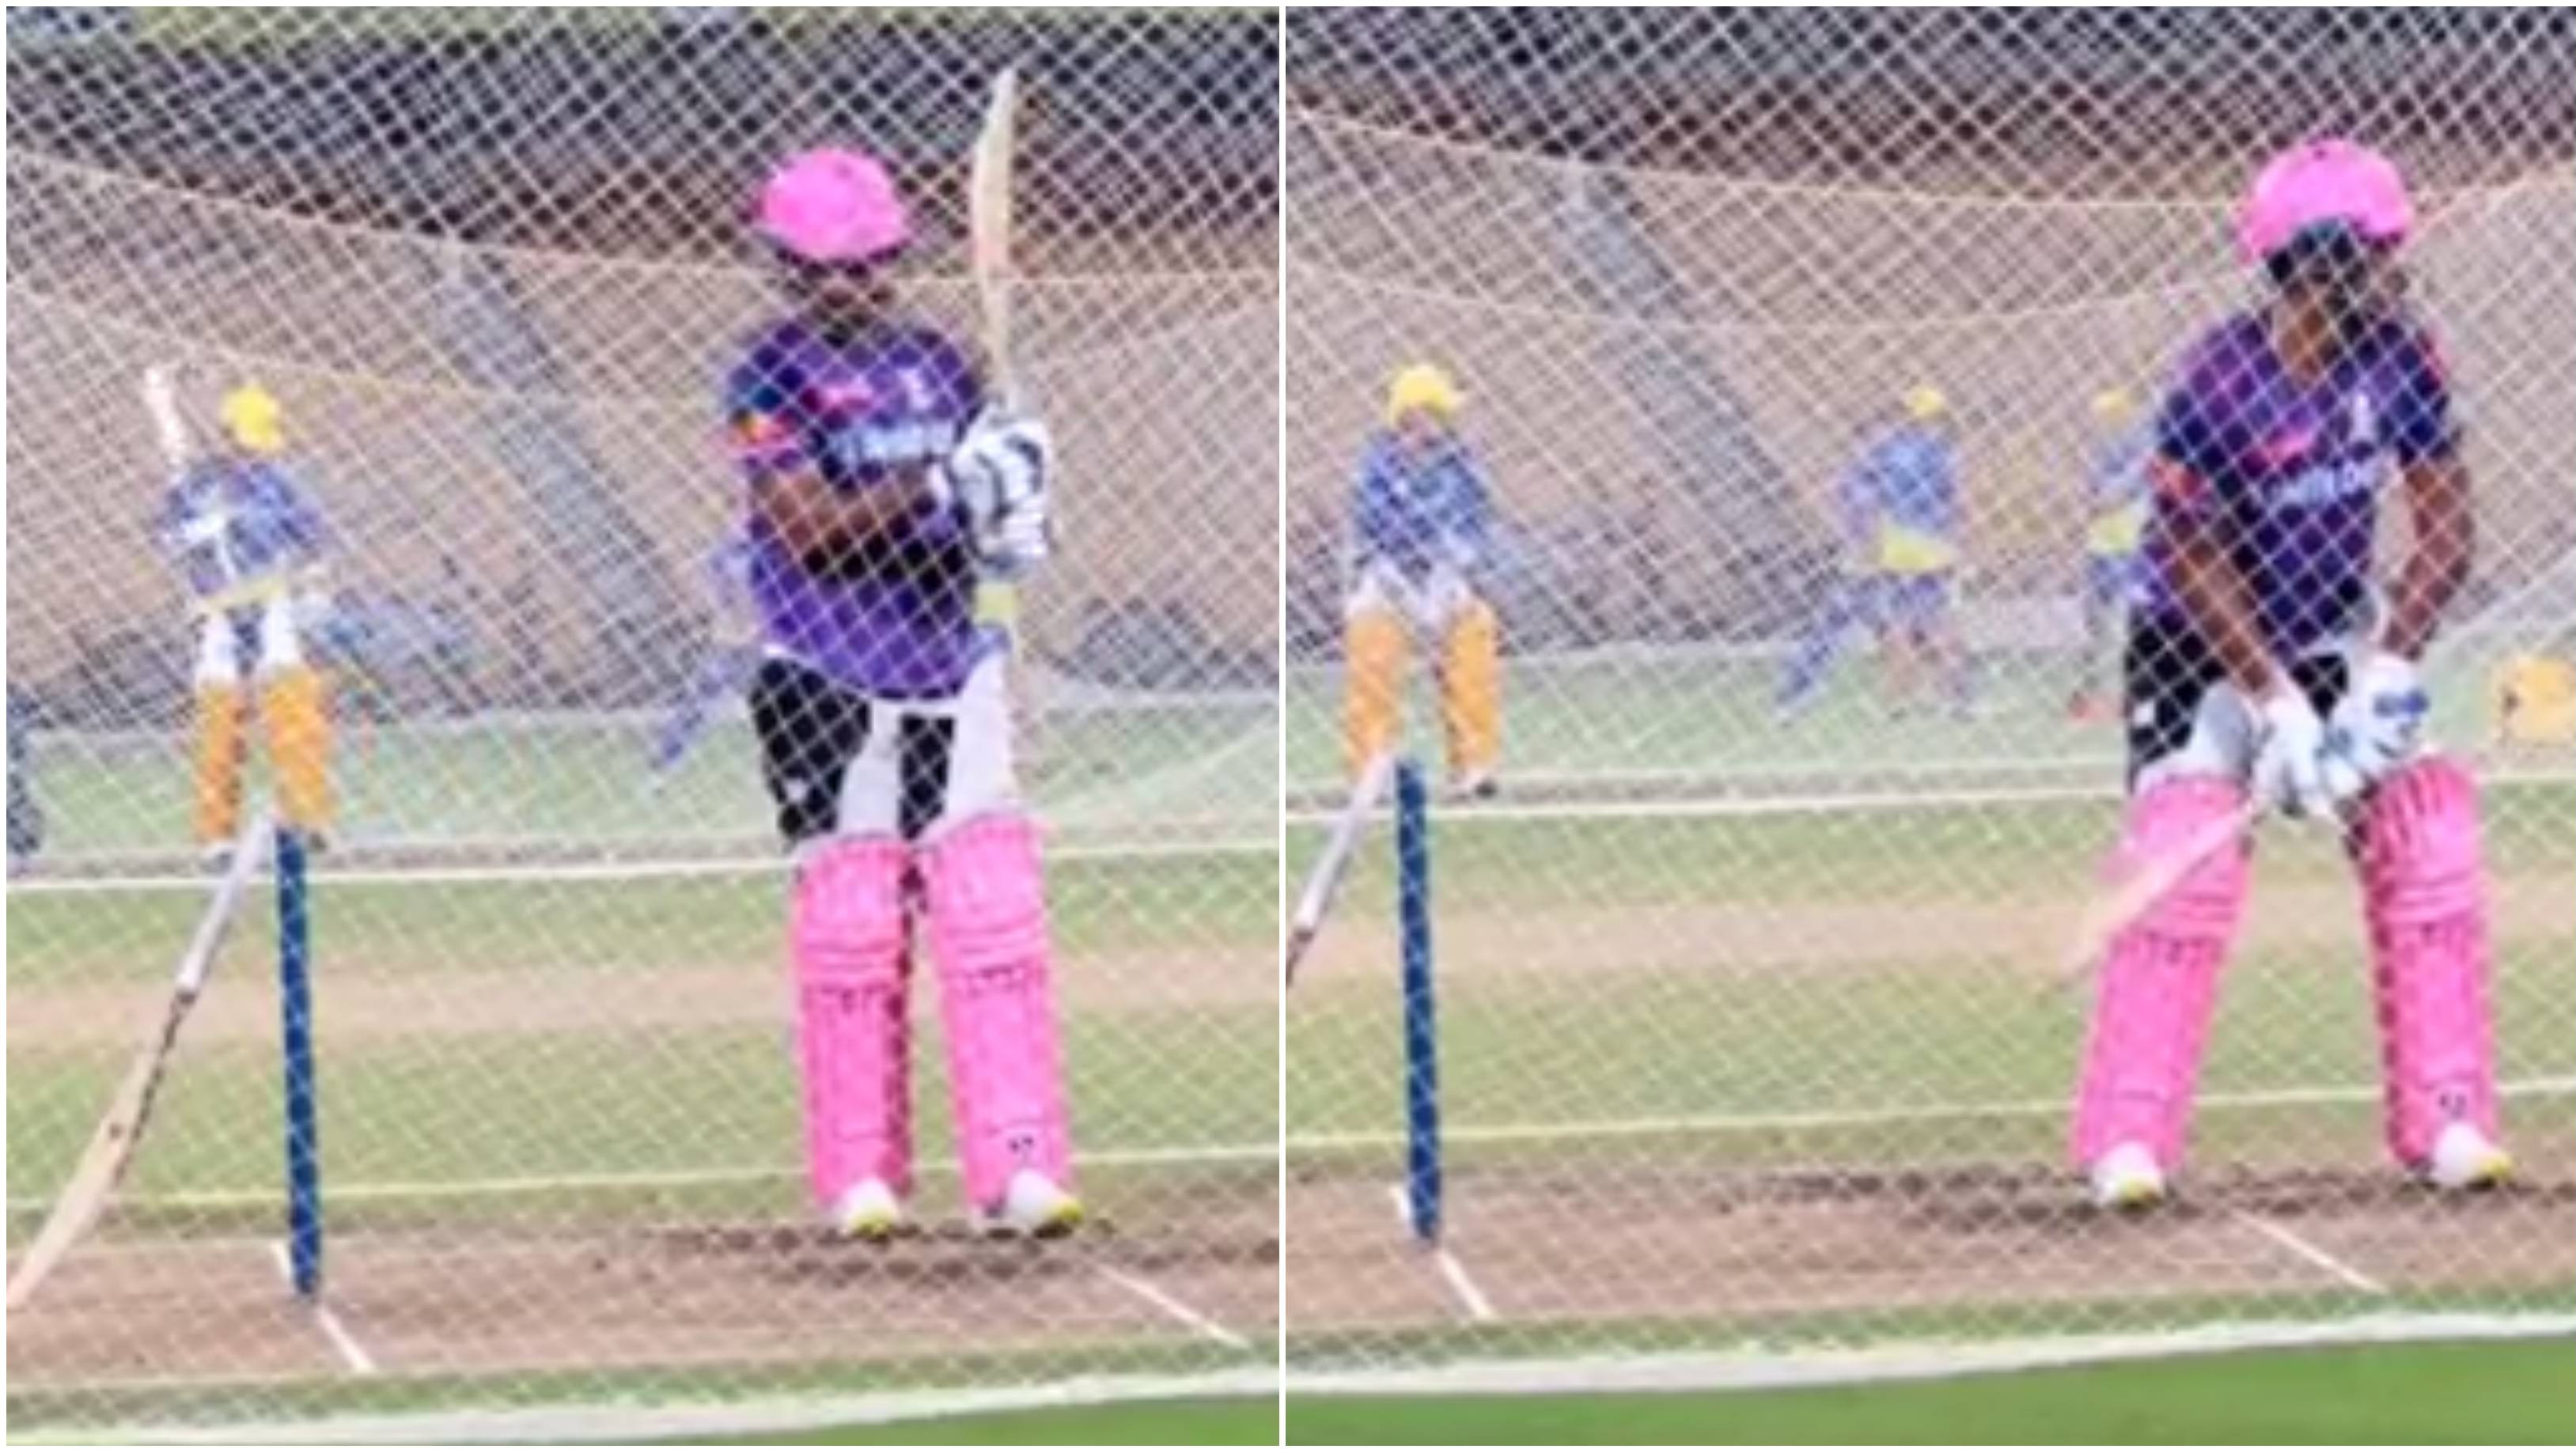 IPL 2023: WATCH – MS Dhoni, Sanju Samson captured in one frame while batting in nets ahead of CSK-RR clash